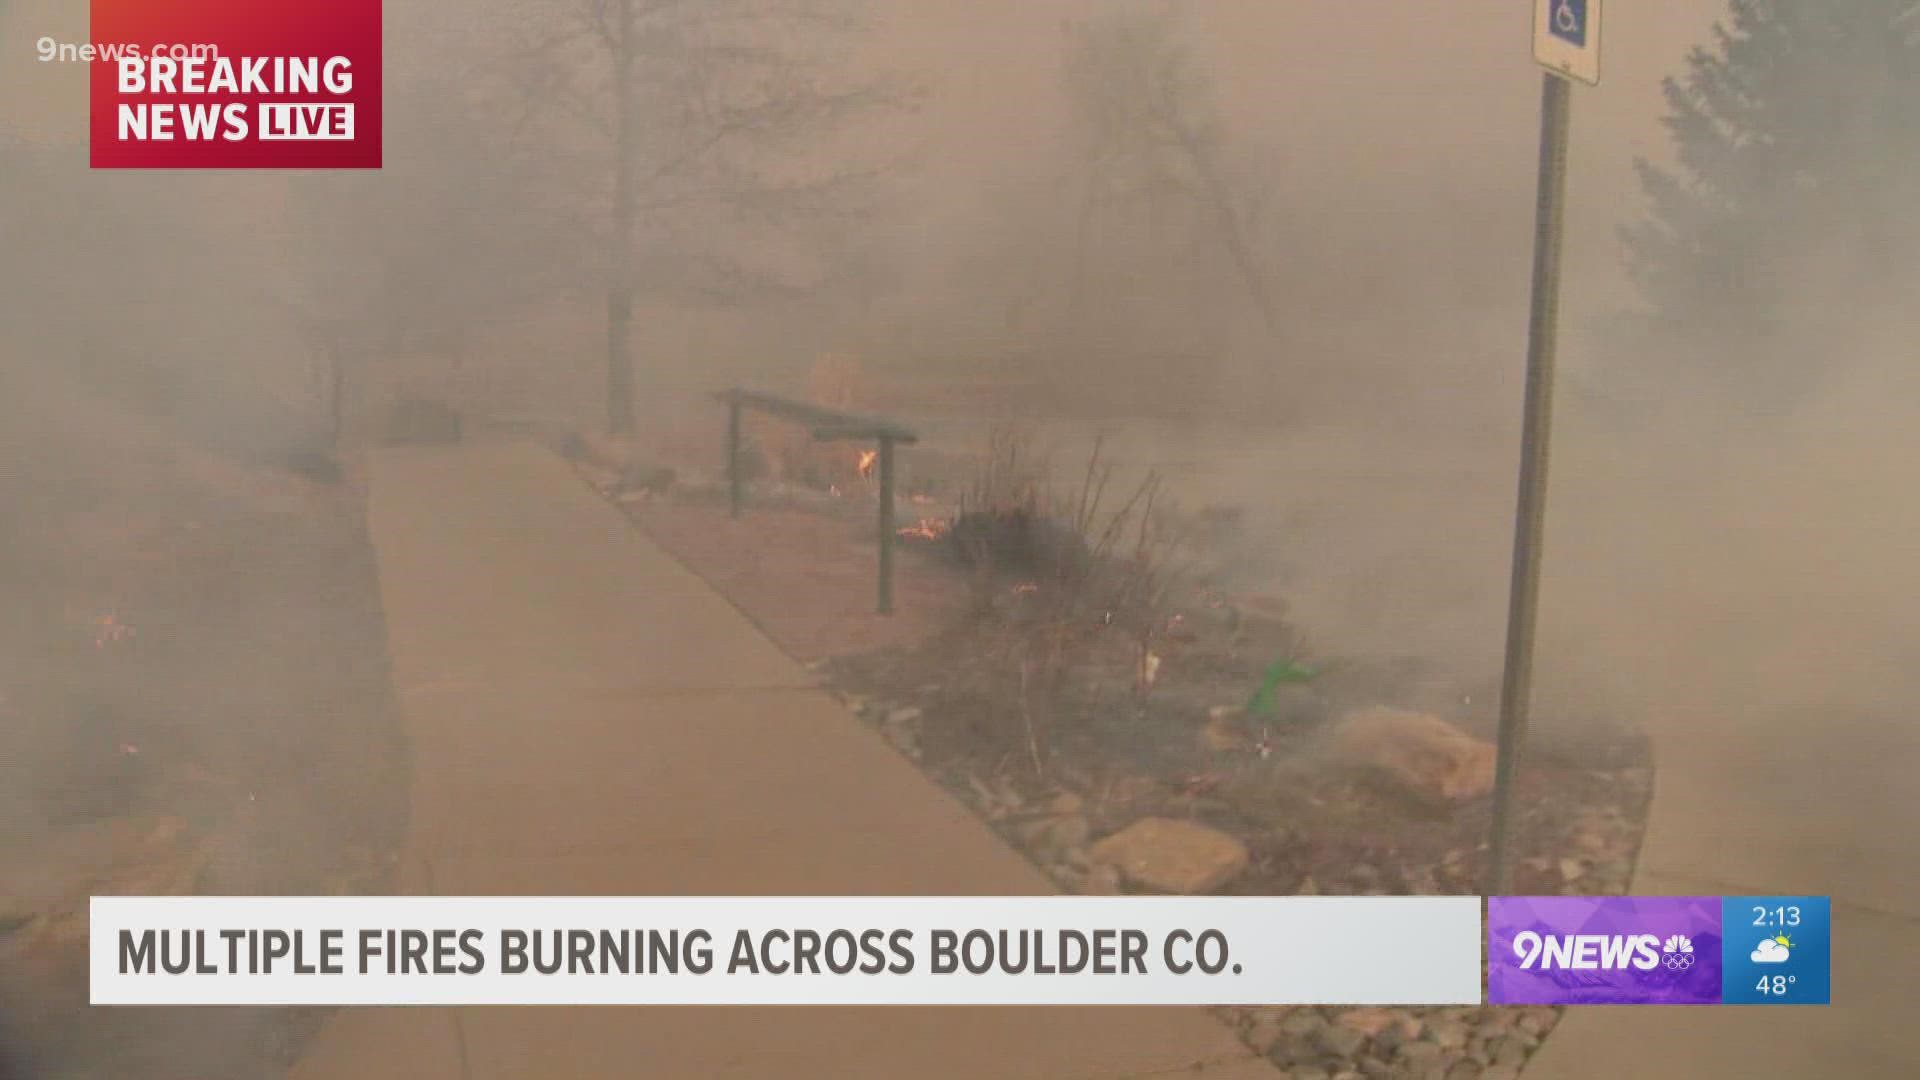 The Boulder Emergency Operations Center was activated to respond to multiple fires reported in Boulder County after extremely strong winds brought down power lines.